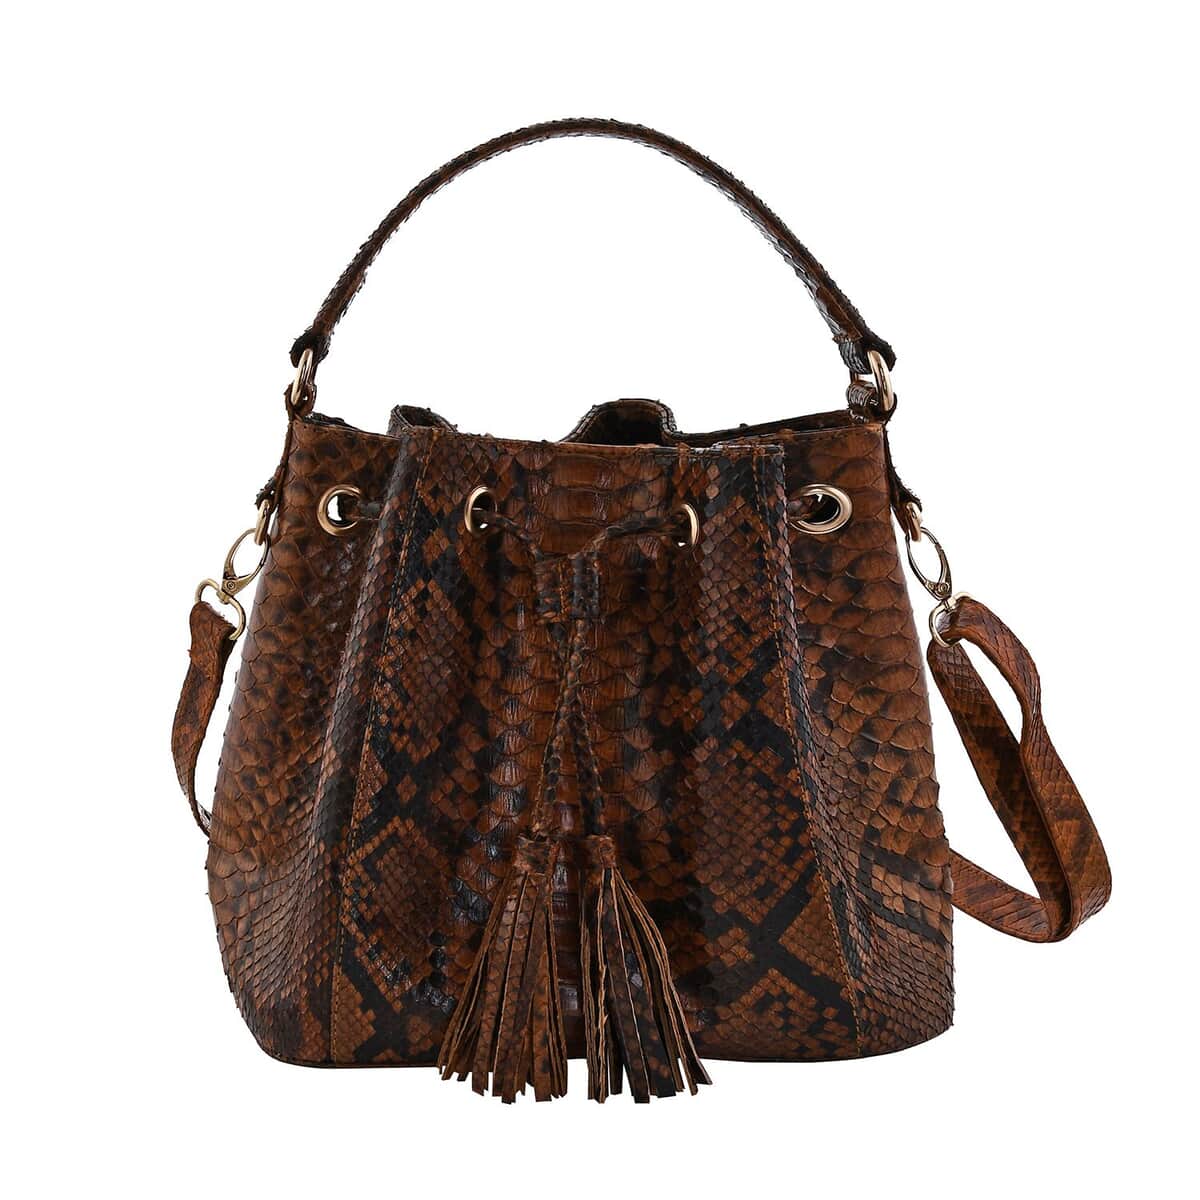 Doorbuster The Grand Pelle Handcrafted Brown Color Genuine Python Leather Tote Bag (15"x4.75"x10") image number 0